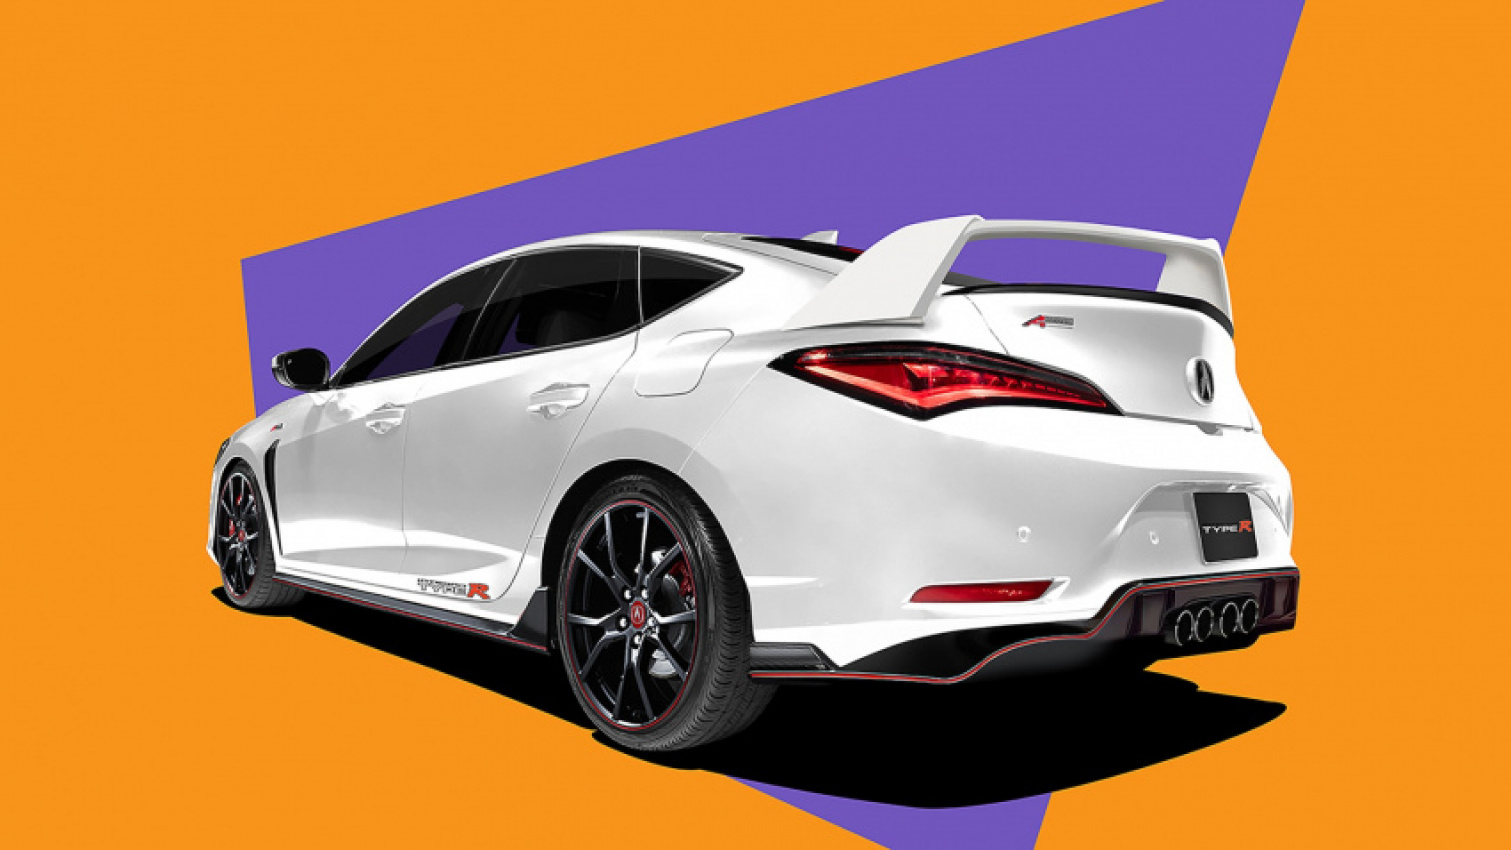 acura, autos, cars, features, honda, honda civic, what if the 2023 acura integra received a honda civic type r-inspired makeover?